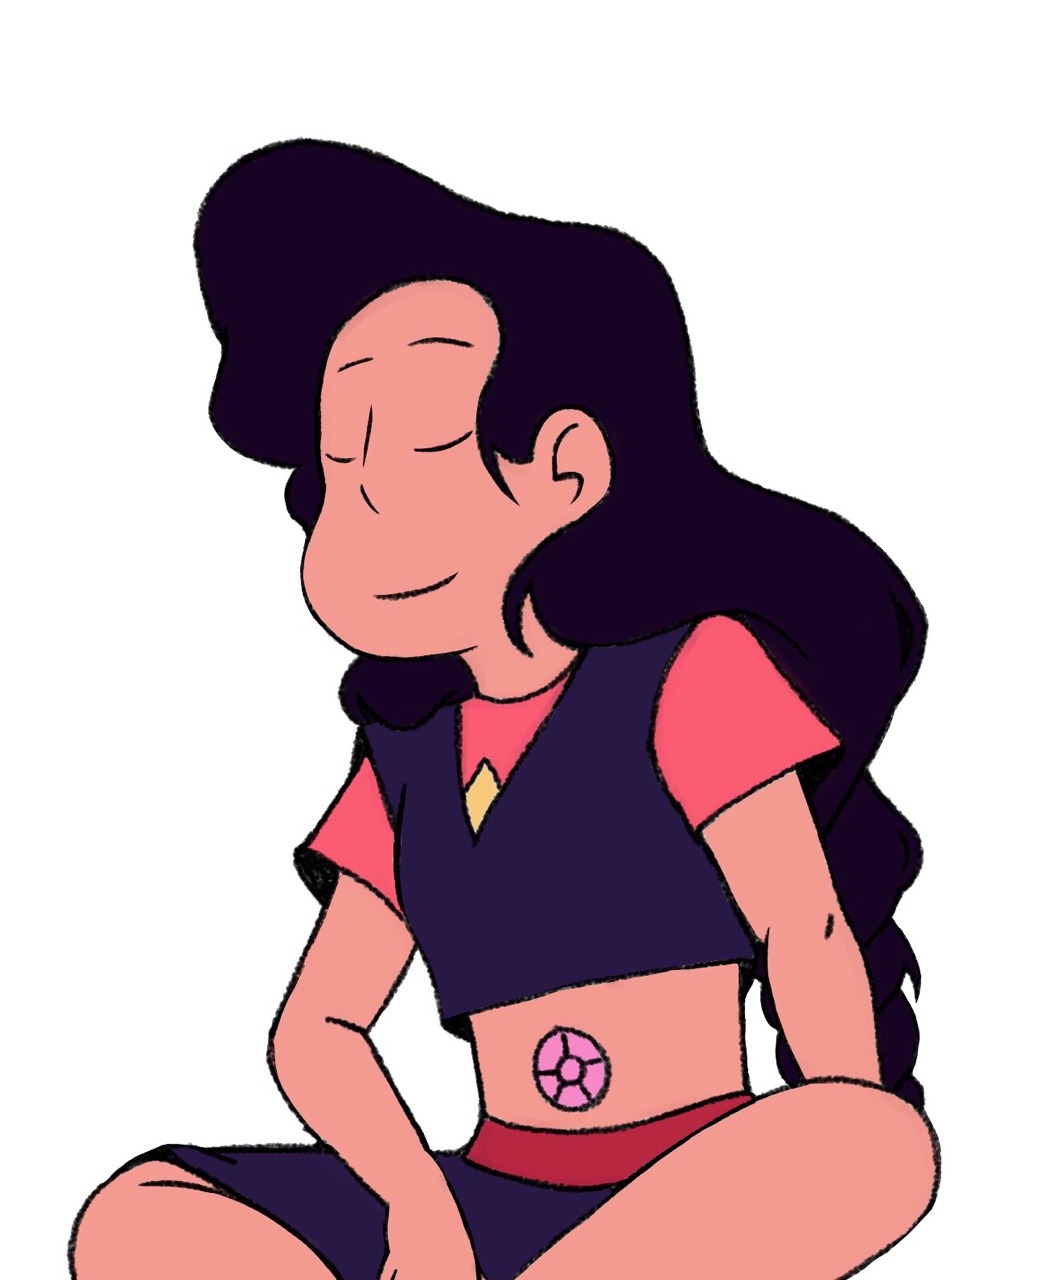 Look I’m a Professor Layton blog but I LOVE Stevonnie. Here, a quick doodle